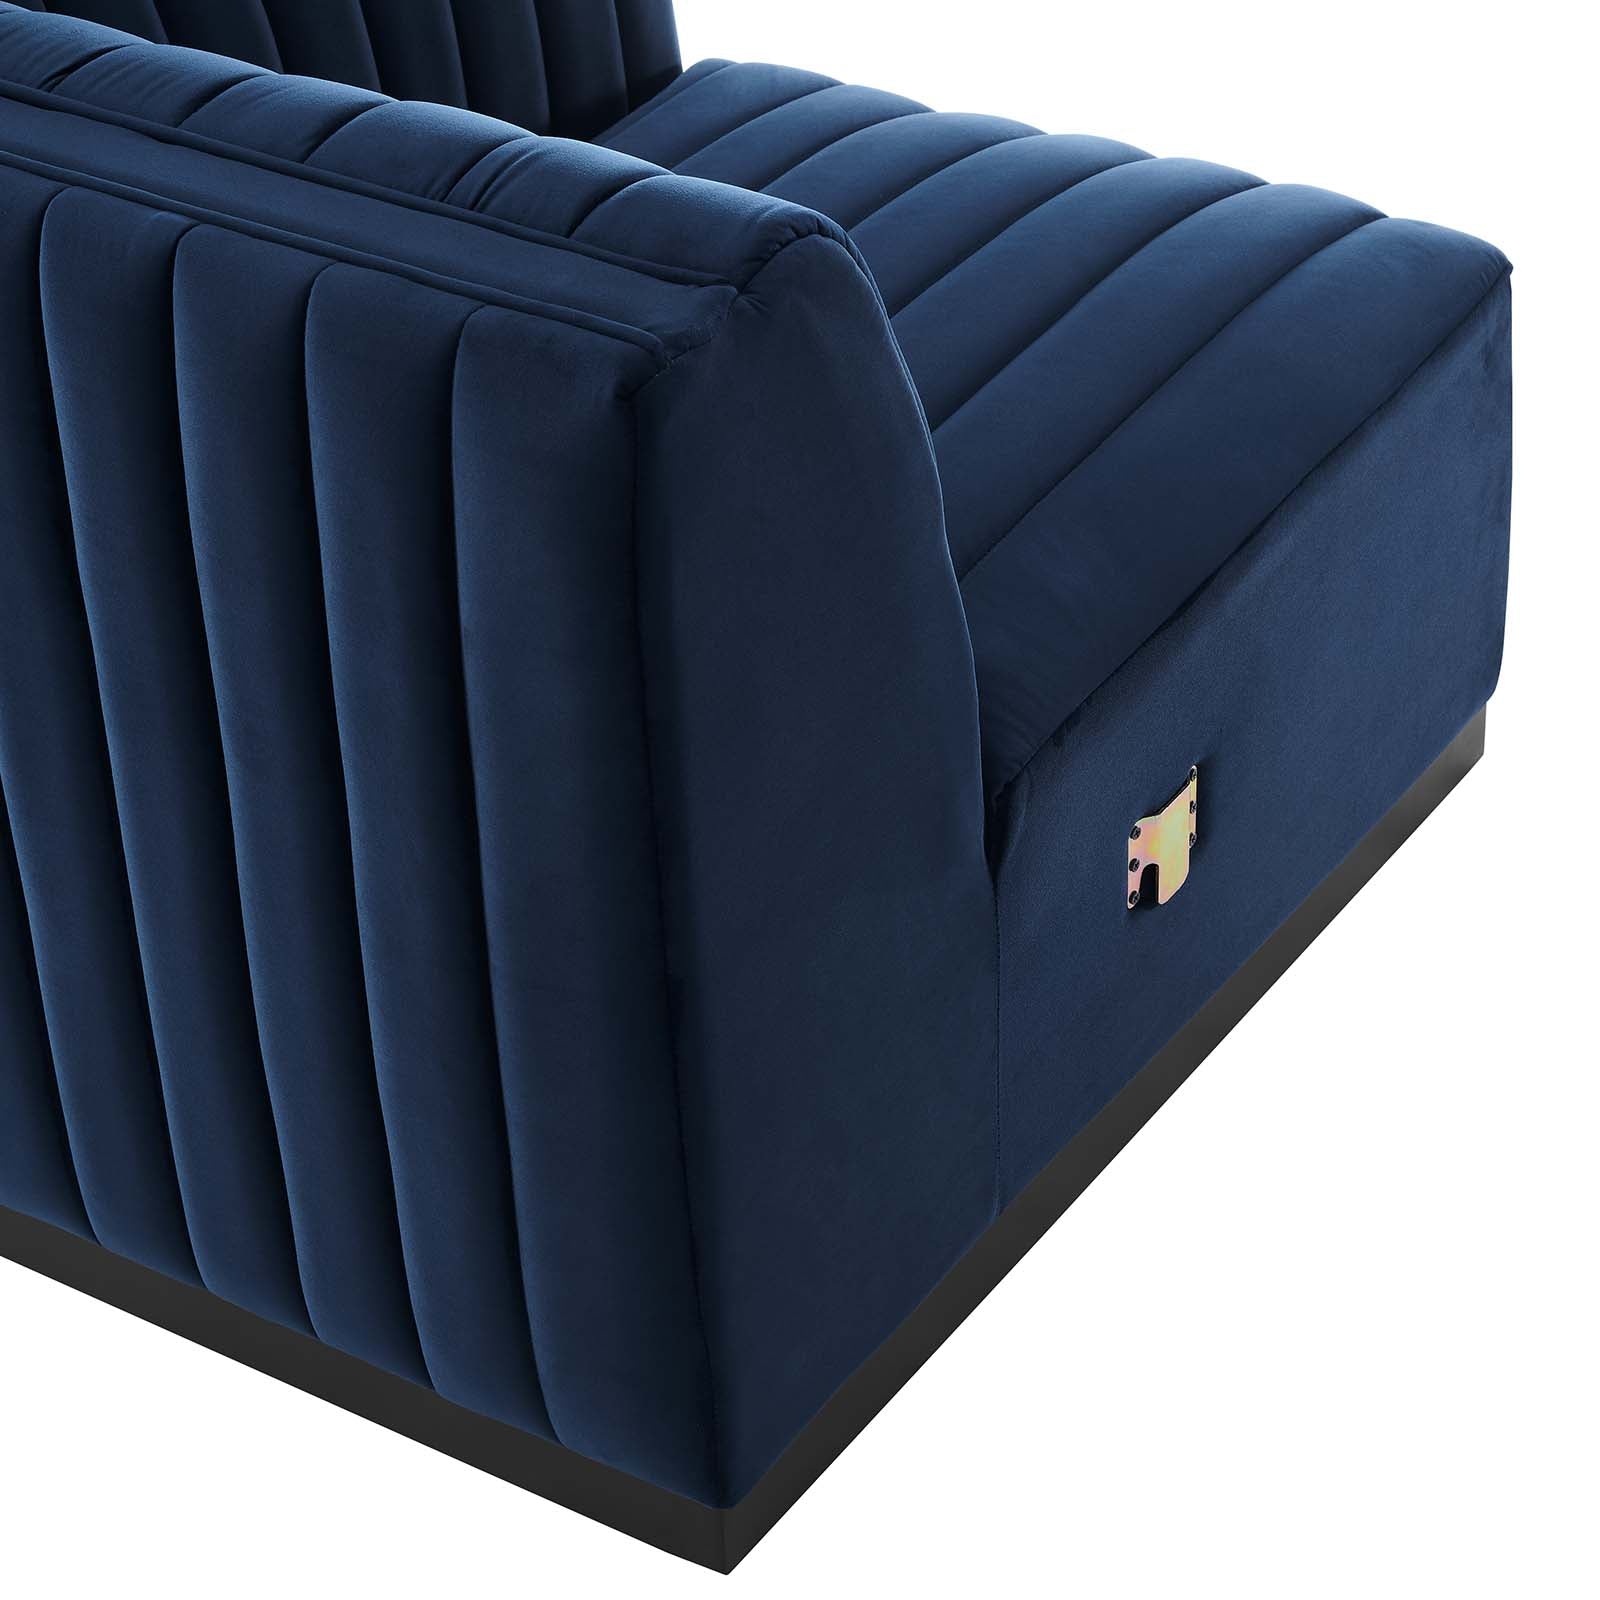 Modway Accent Chairs - Conjure Channel Tufted Performance Velvet Right Corner Chair Black Midnight Blue